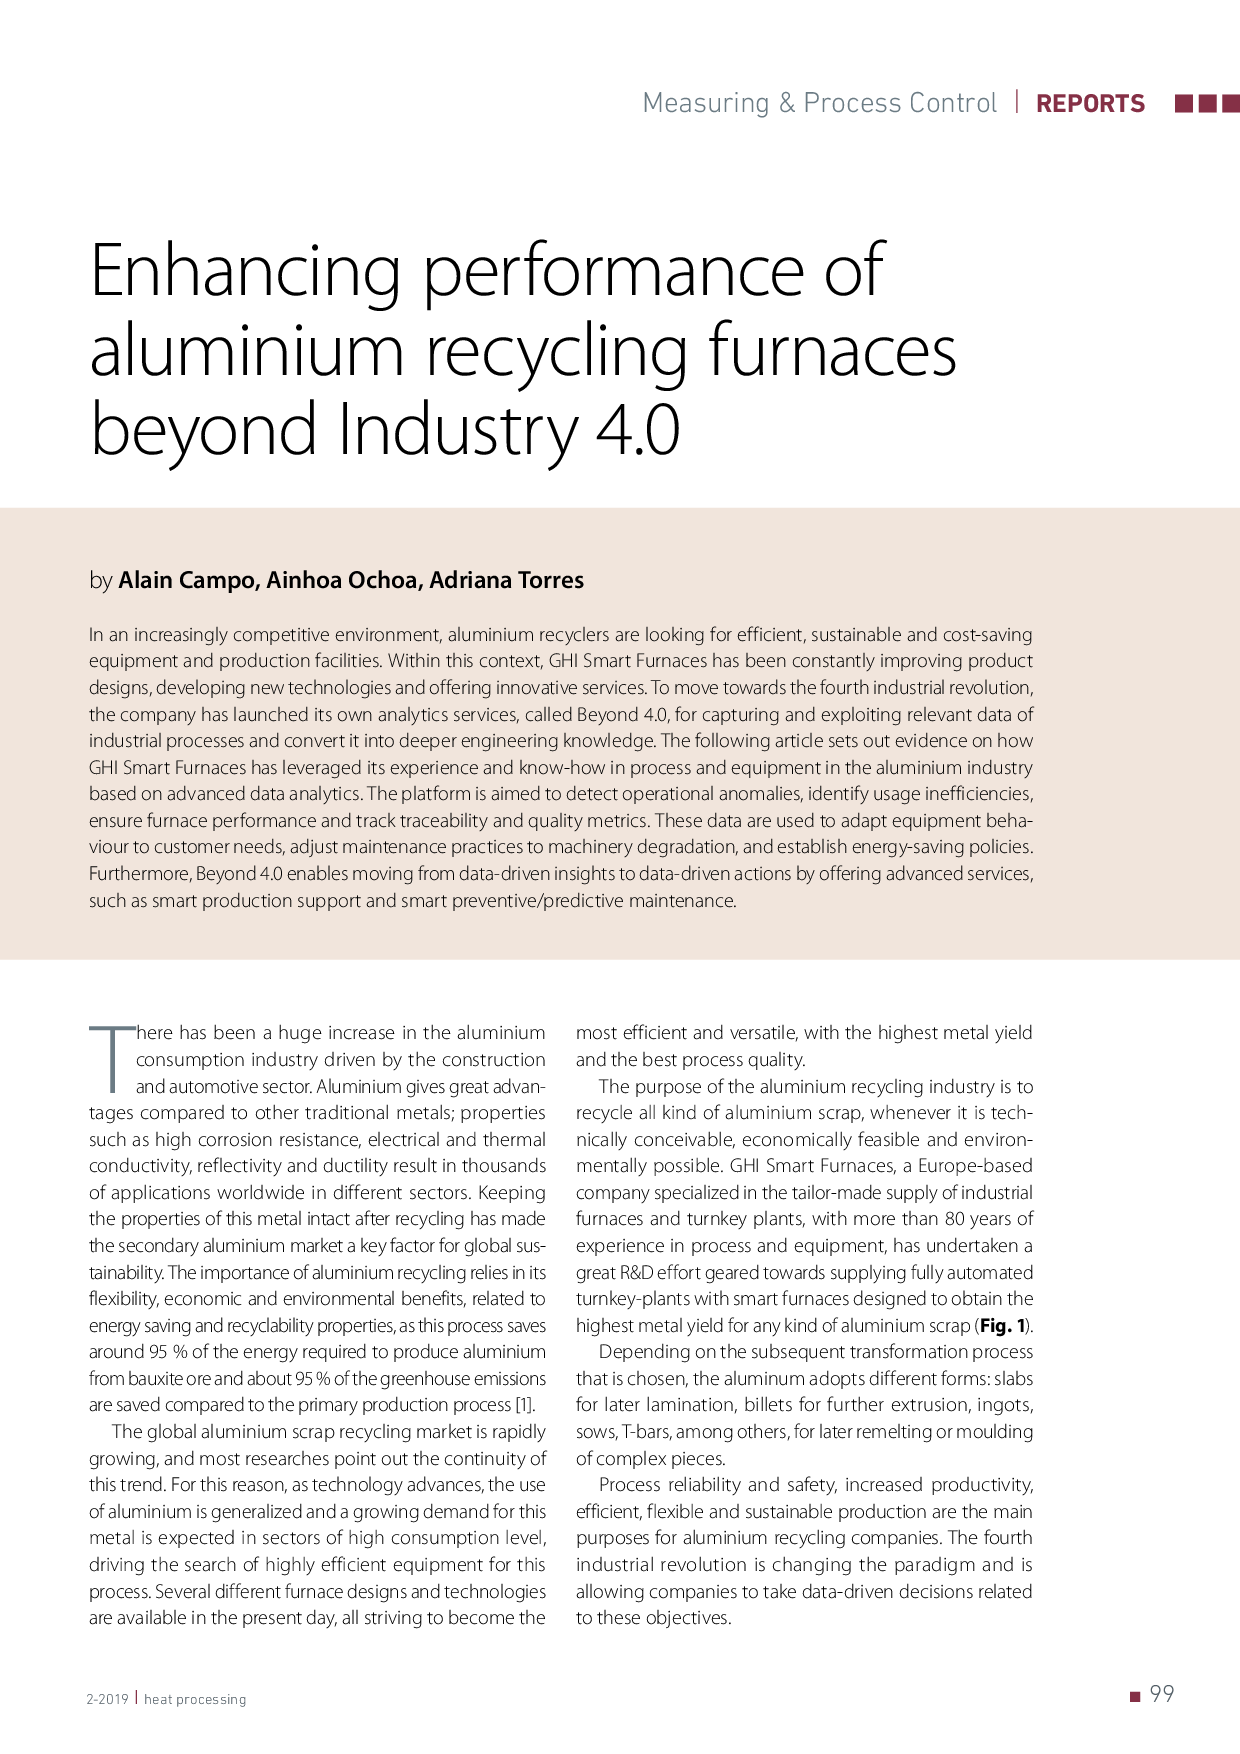 Enhancing performance of aluminium recycling furnaces beyond Industry 4.0